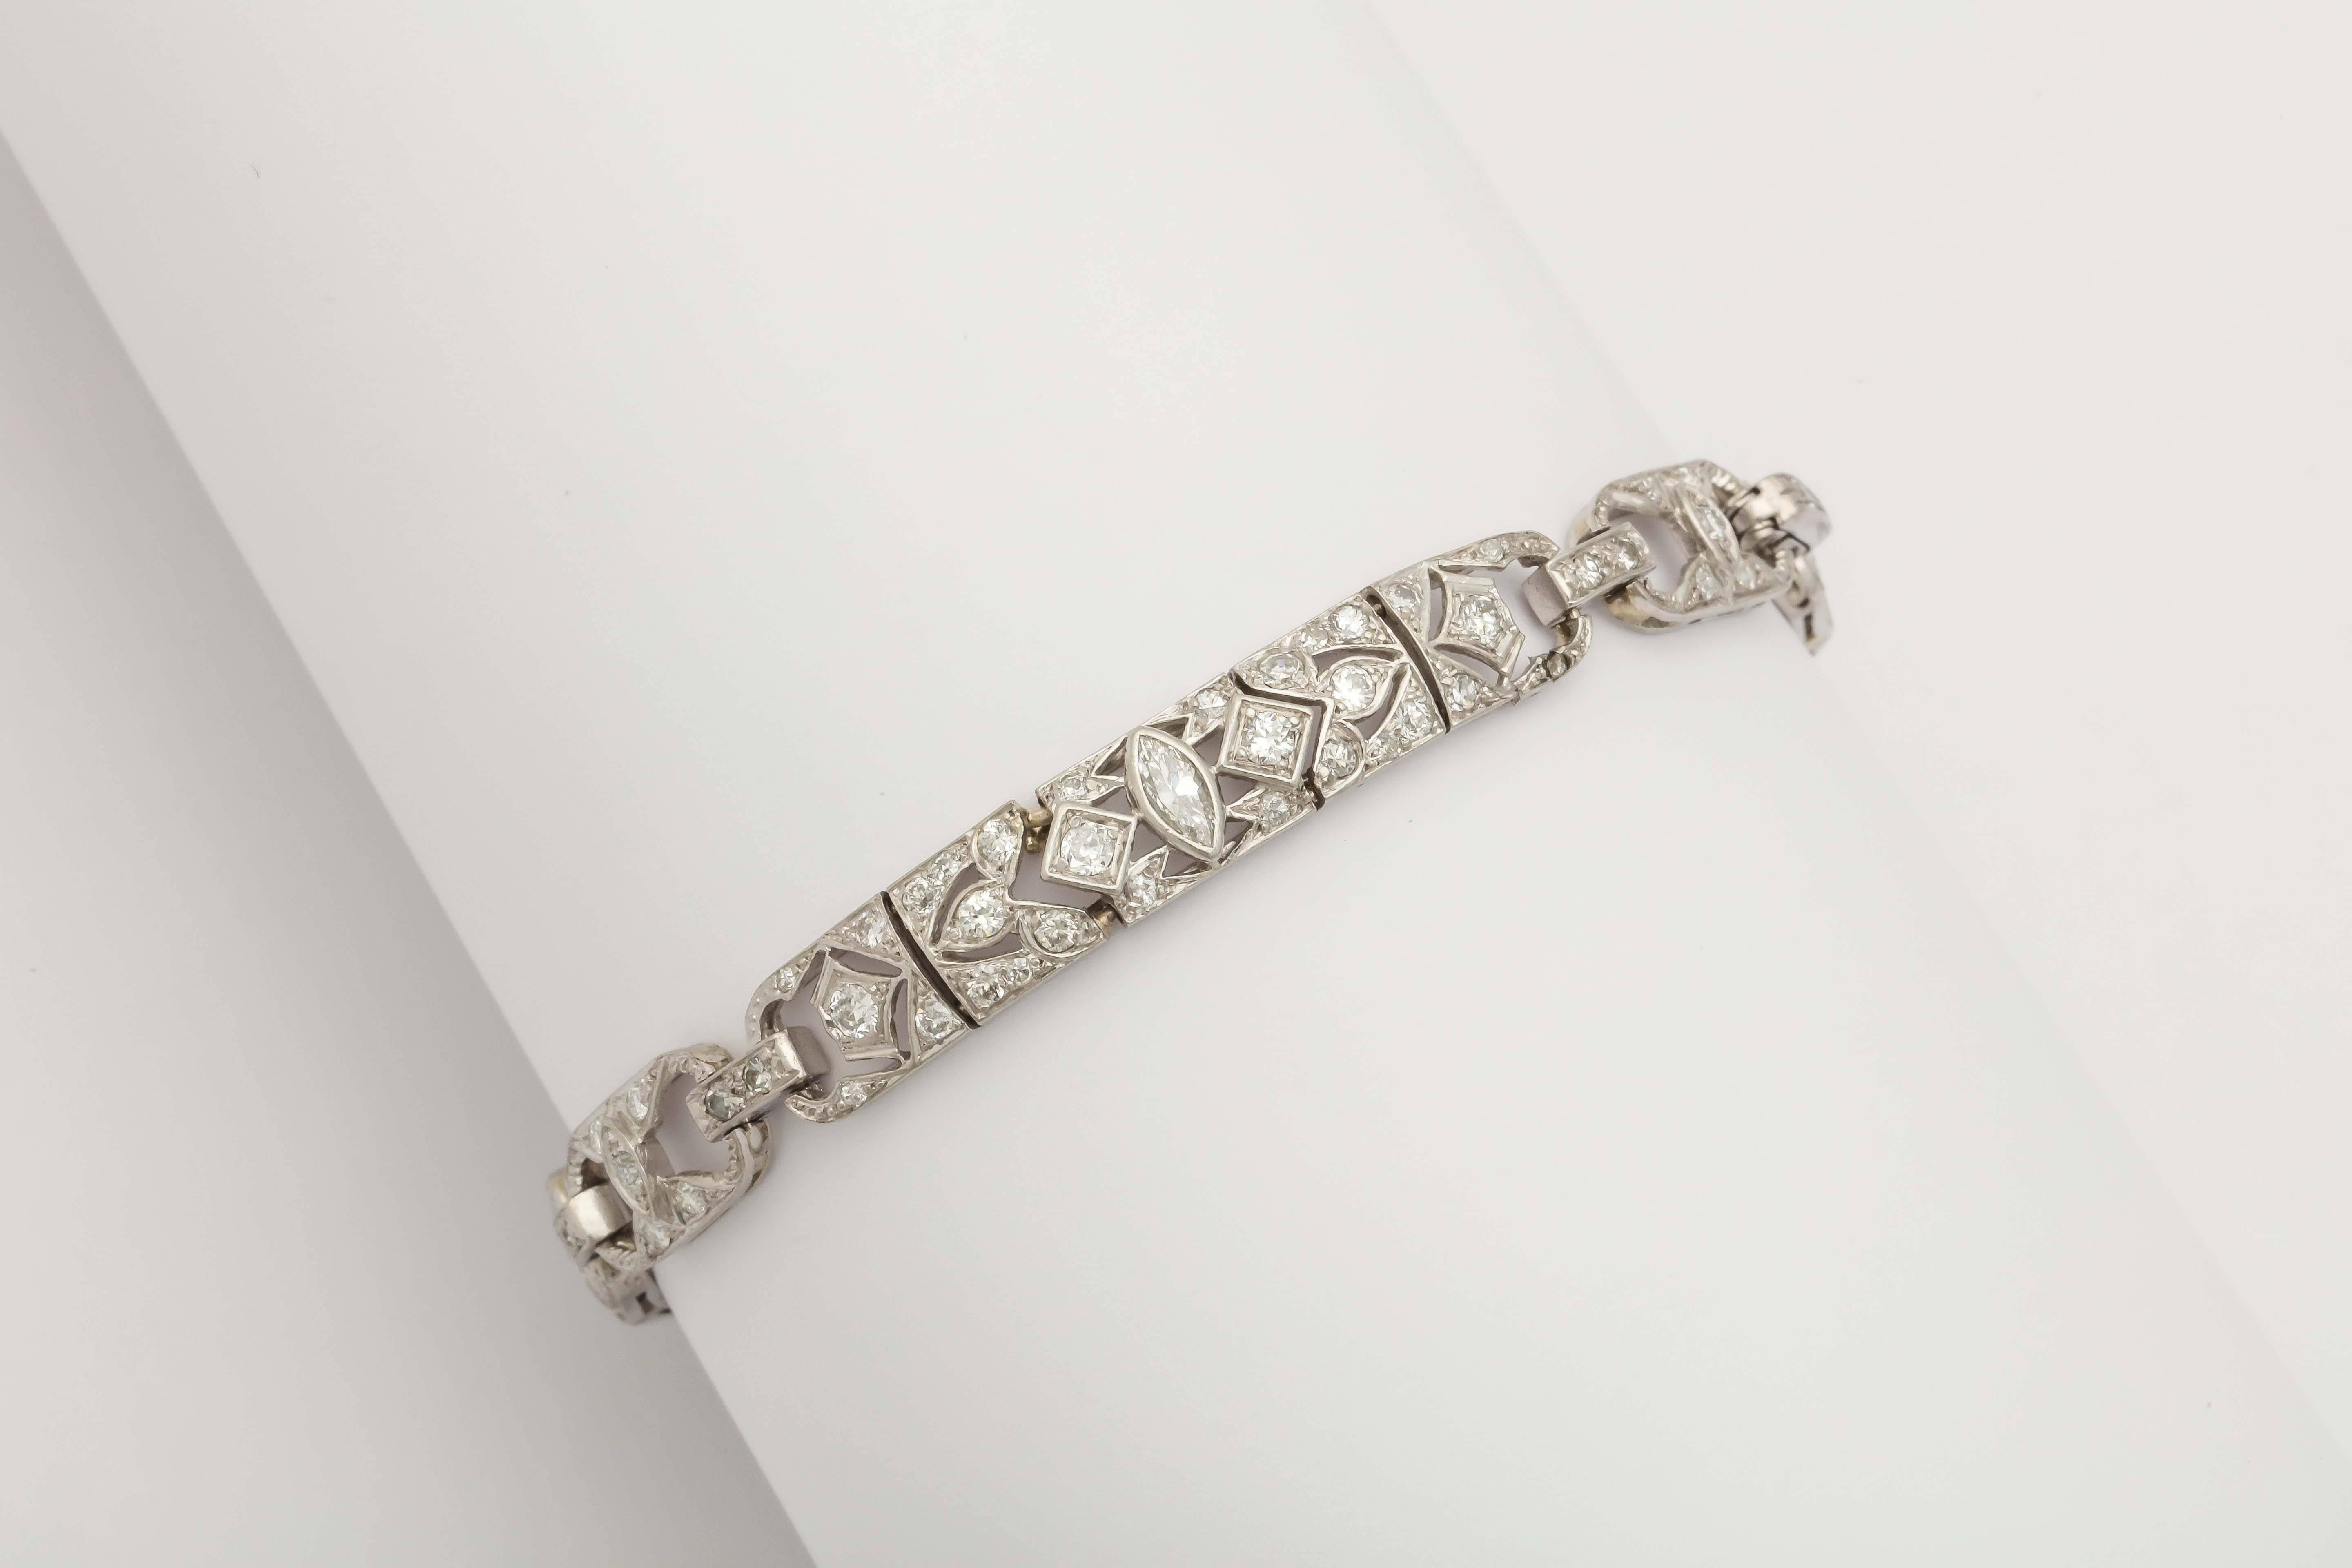 One Platinum Decorated With Diamonds Art Deco Flexible Link Bracelet Exhibiting Beautiful Open Design Craftmanship 3.50 Carats Approximate Diamond weight. Made In America In The 1920's.